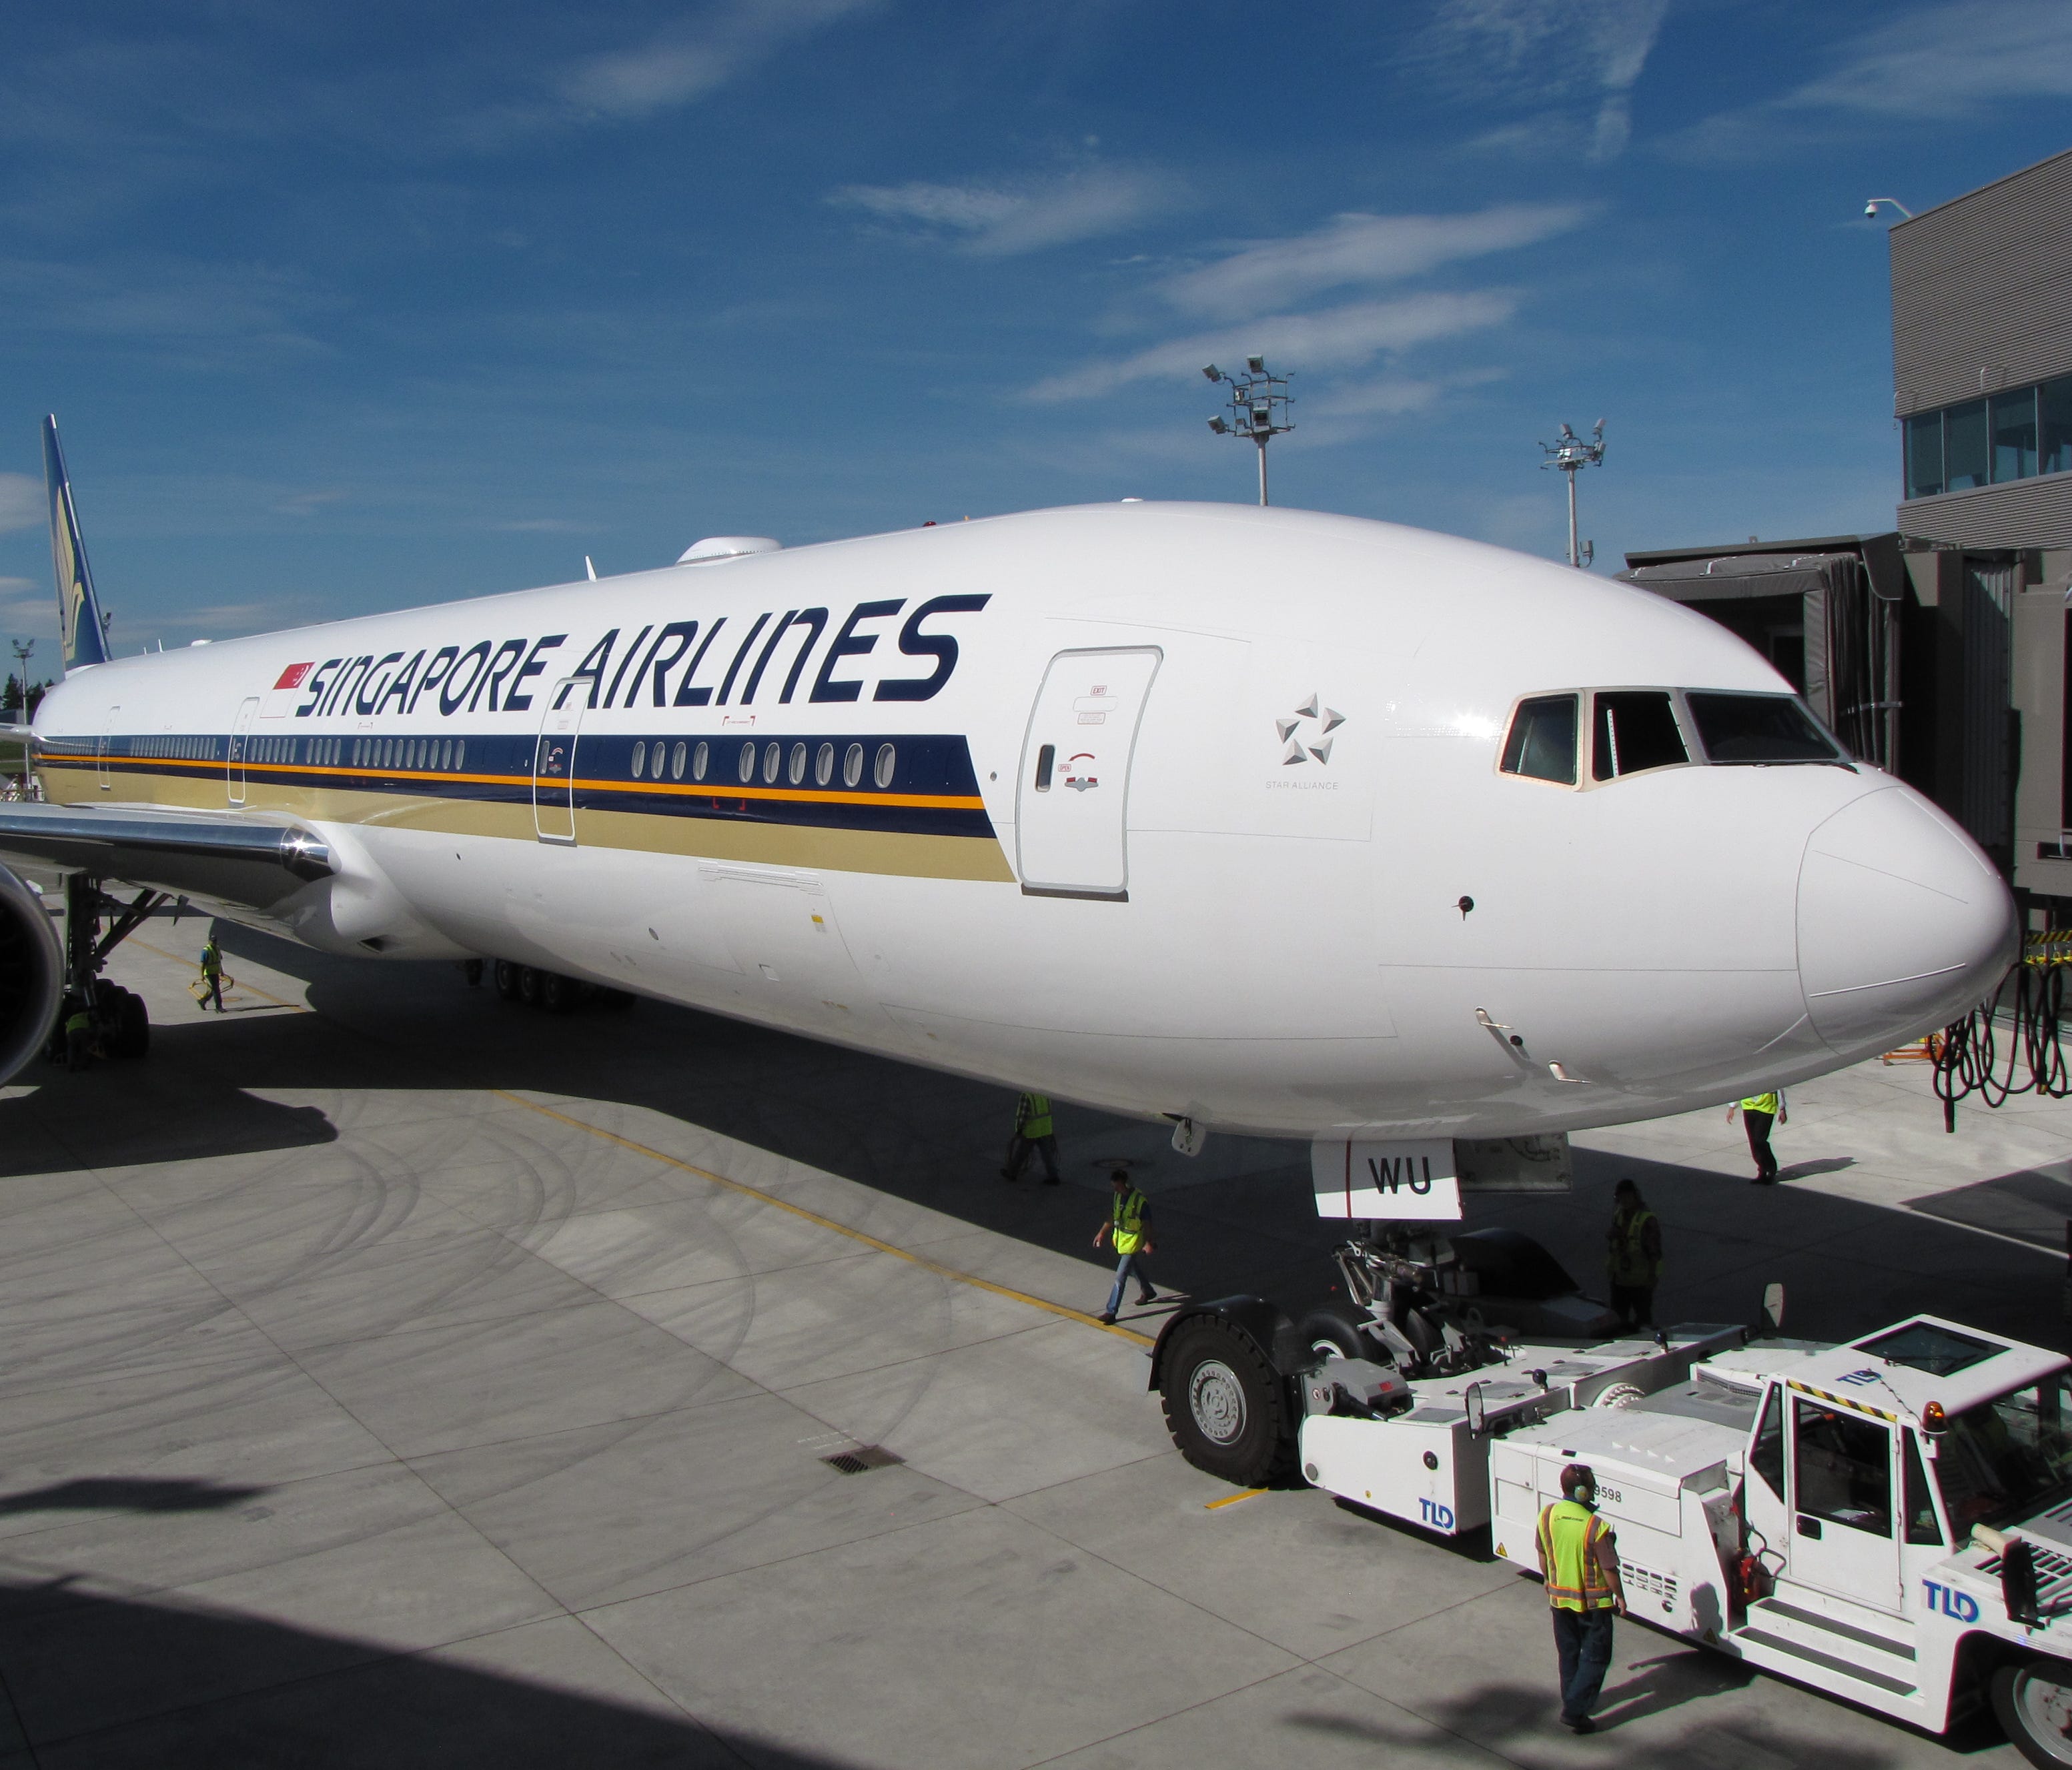 Seen here in a photo from September 2013 is a shot of the first Singapore Airlines Boeing 777-300ER to be configured with its all-new interior at the gate at Boeing's Everett Delivery Center.